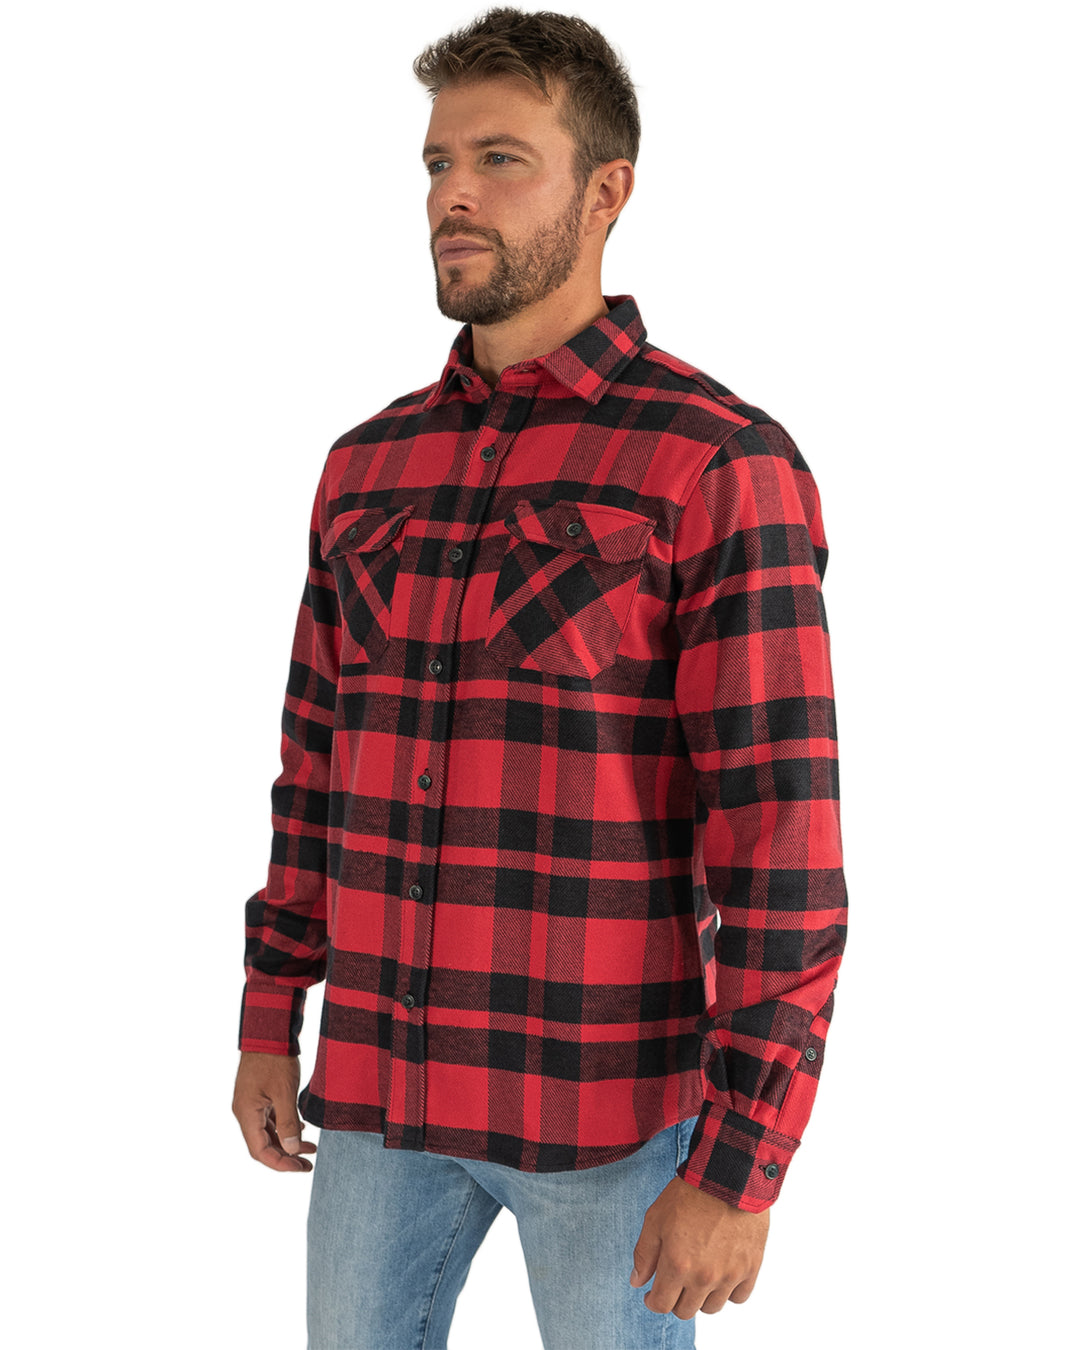 Field Grand Flannel in Red Plaid, 100% Cotton Flannel Shirt for Men by MuskOx